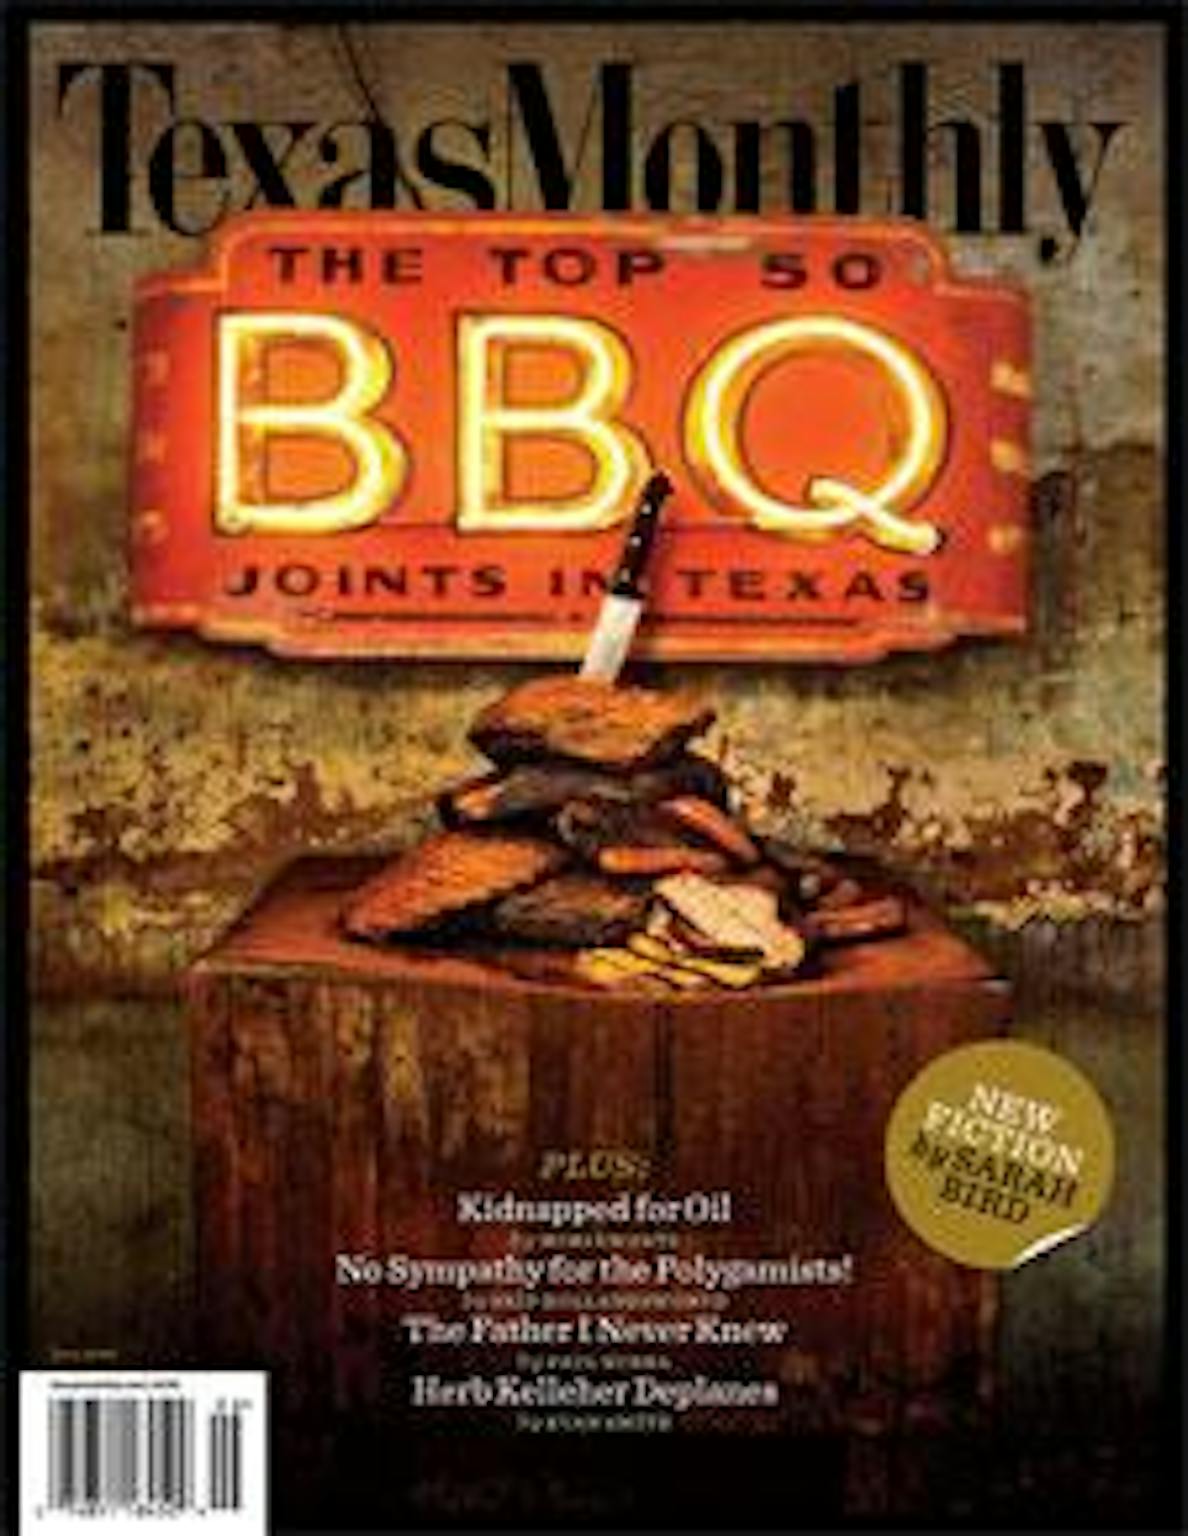 Texas Barbecue Monthly – Texas Monthly